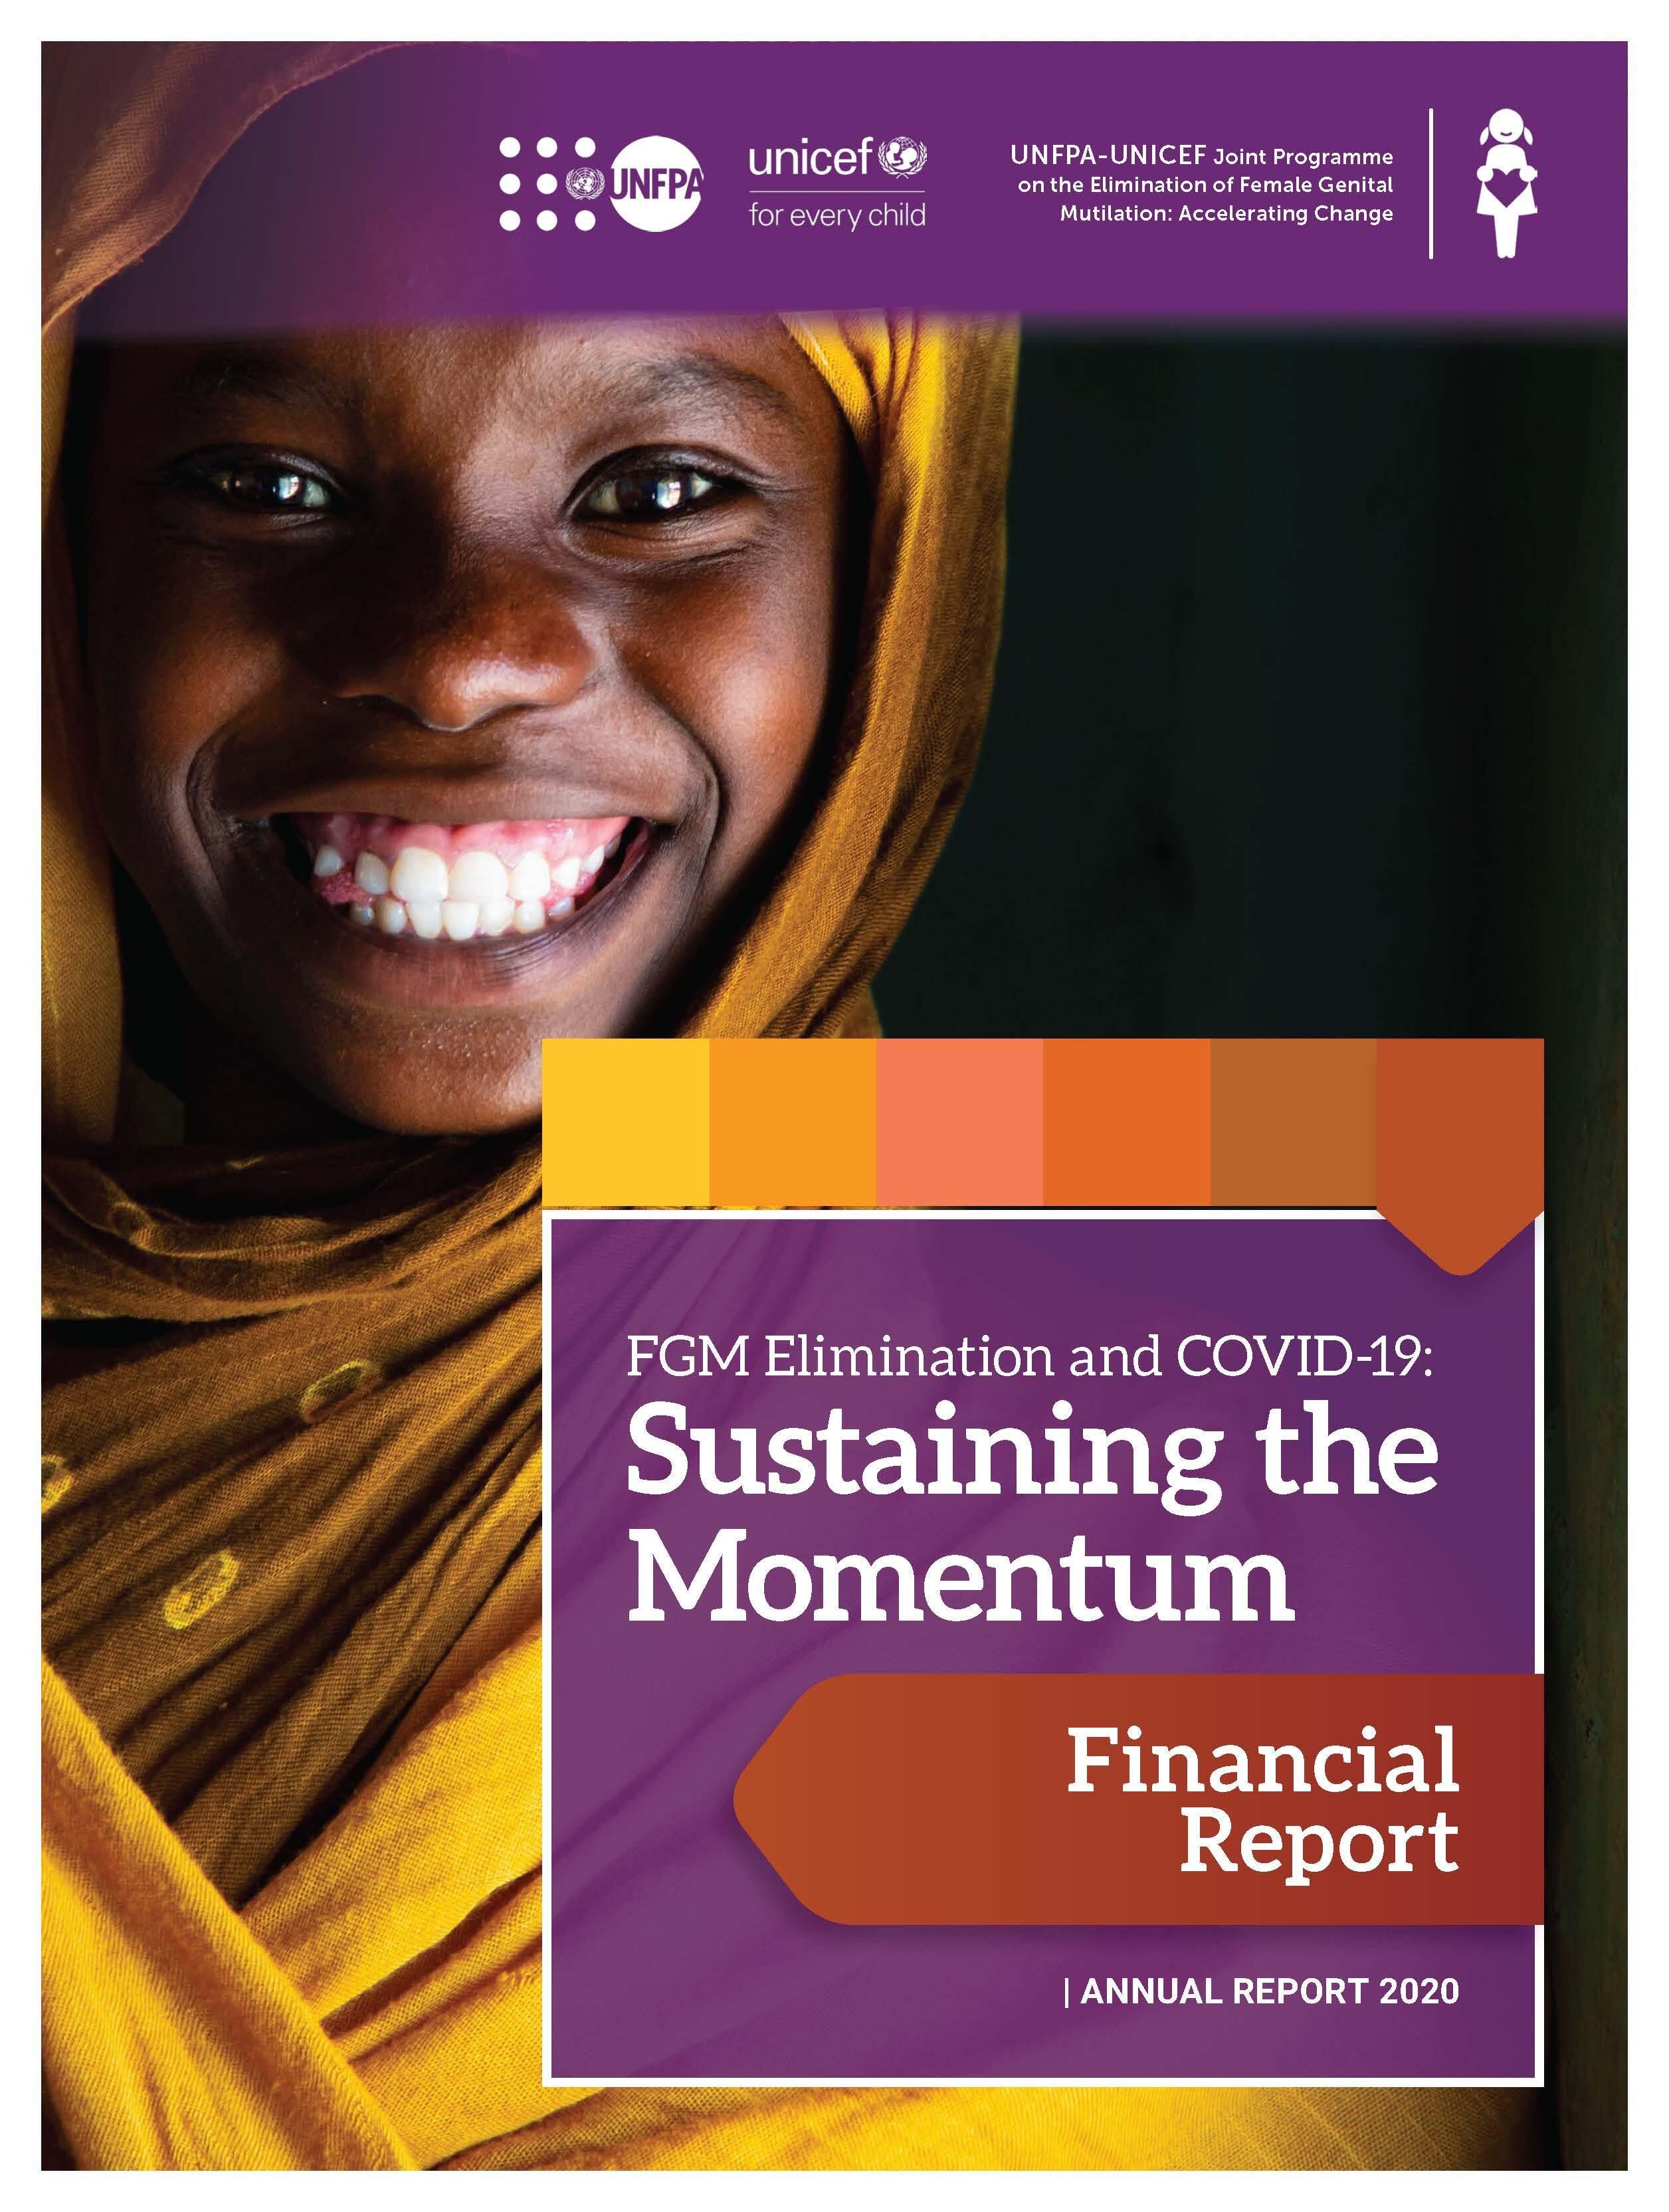 Girl in gold hijab smiling on FGM report 2020 front cover